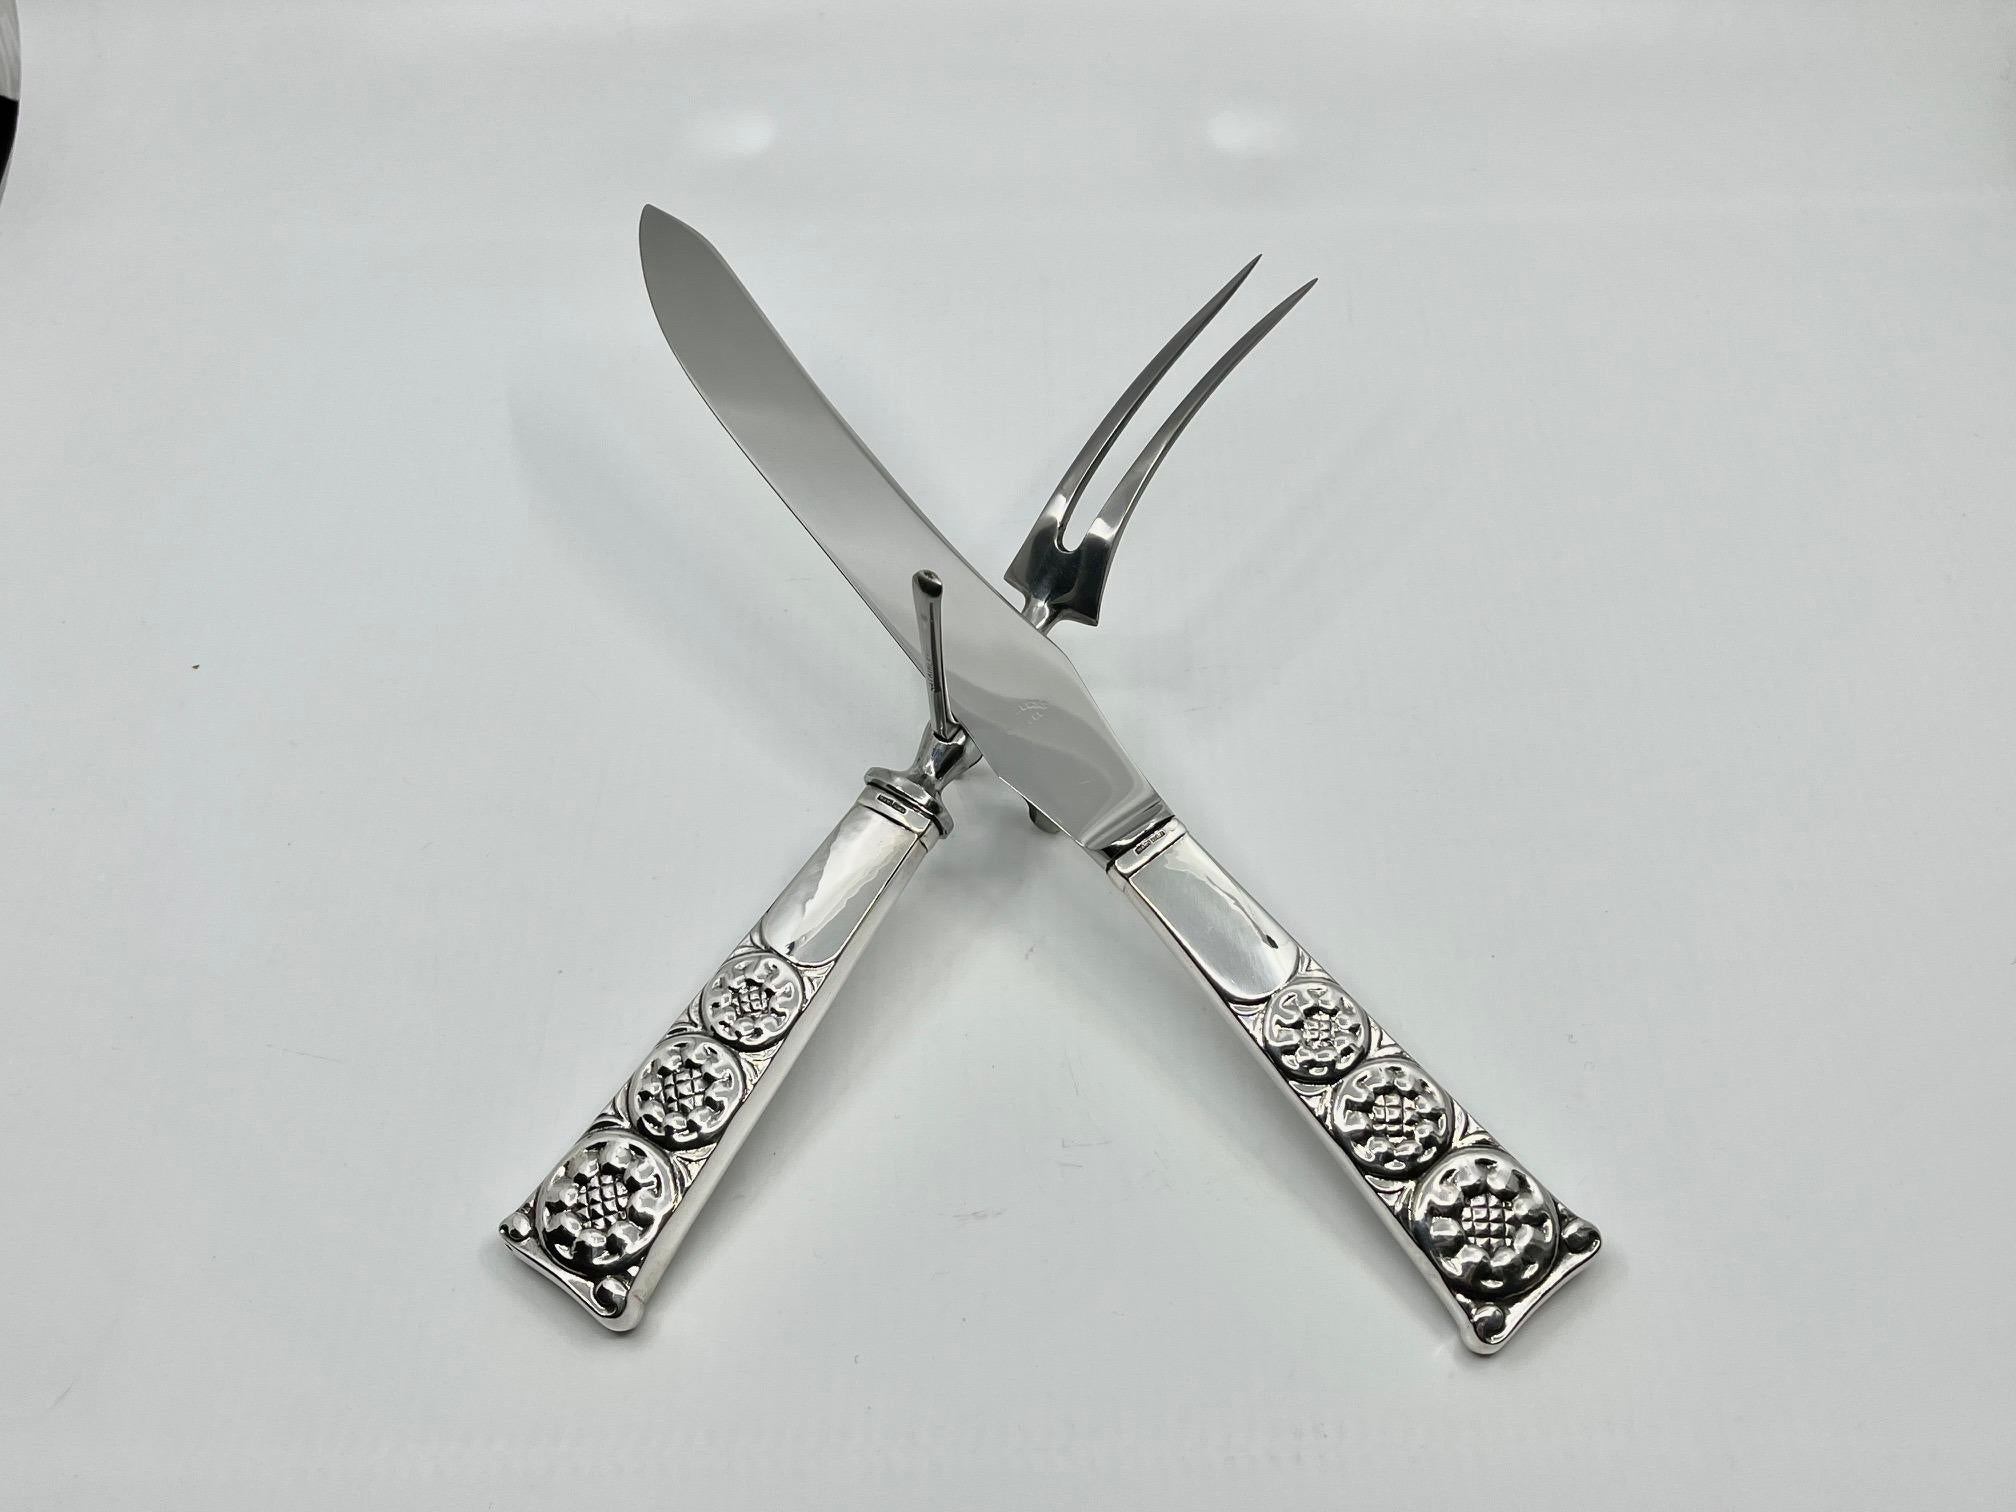 A Georg Jensen carving set with sterling silver handles and stainless steel blade/fork in the Dahlia pattern, the medium size #243, design #3 by Siegfried Wagner from 1912.

Additional information:
Material: Sterling silver
Style: Art